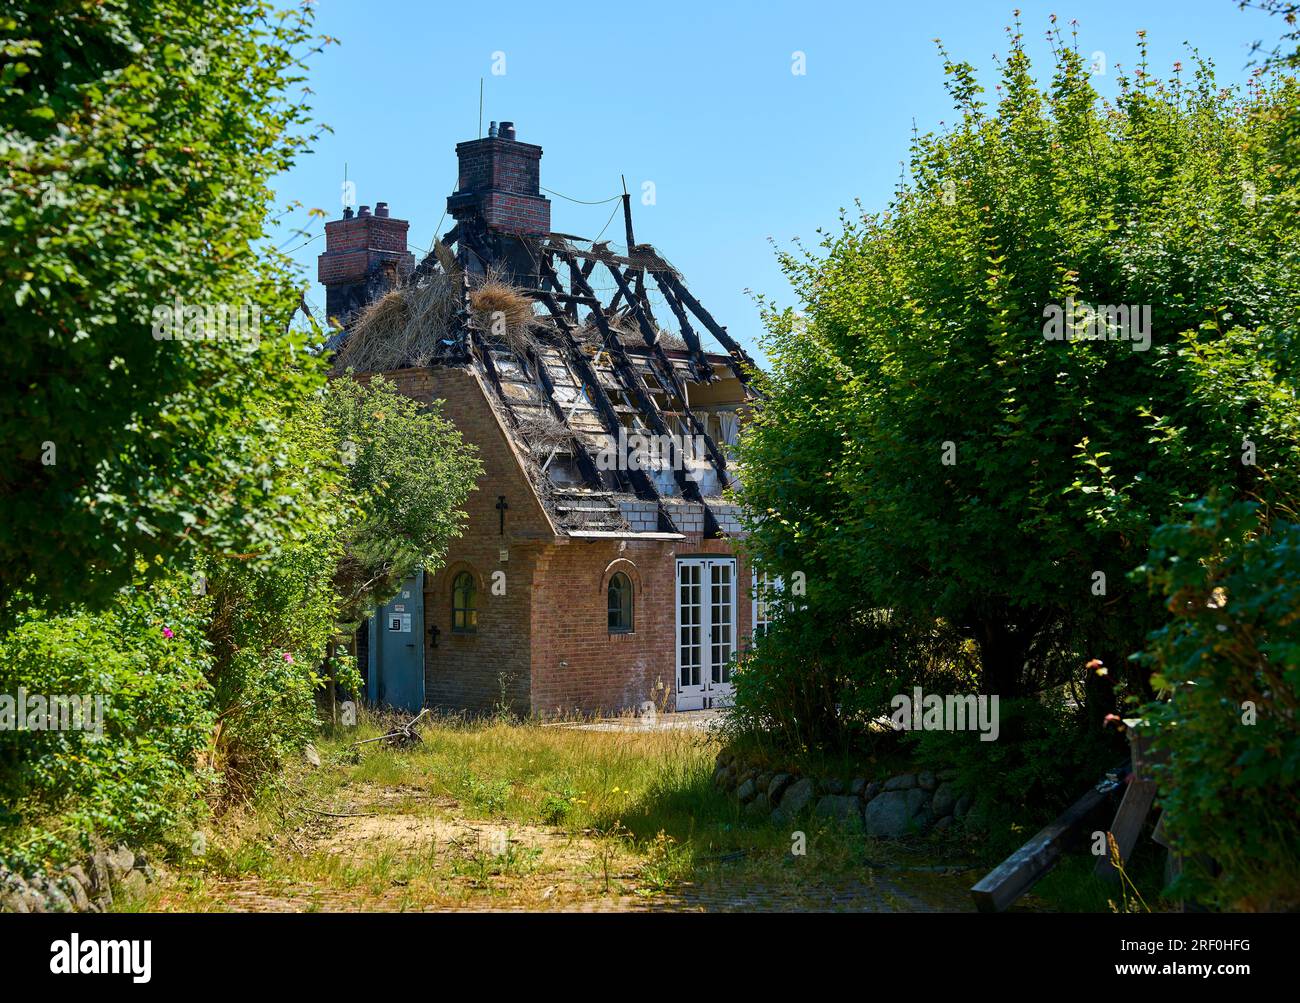 Burned thatched house  on June 26, 2023  in Kampen near Westerland, Sylt Island, Germany.  © Peter Schatz / Alamy Stock Photos Stock Photo